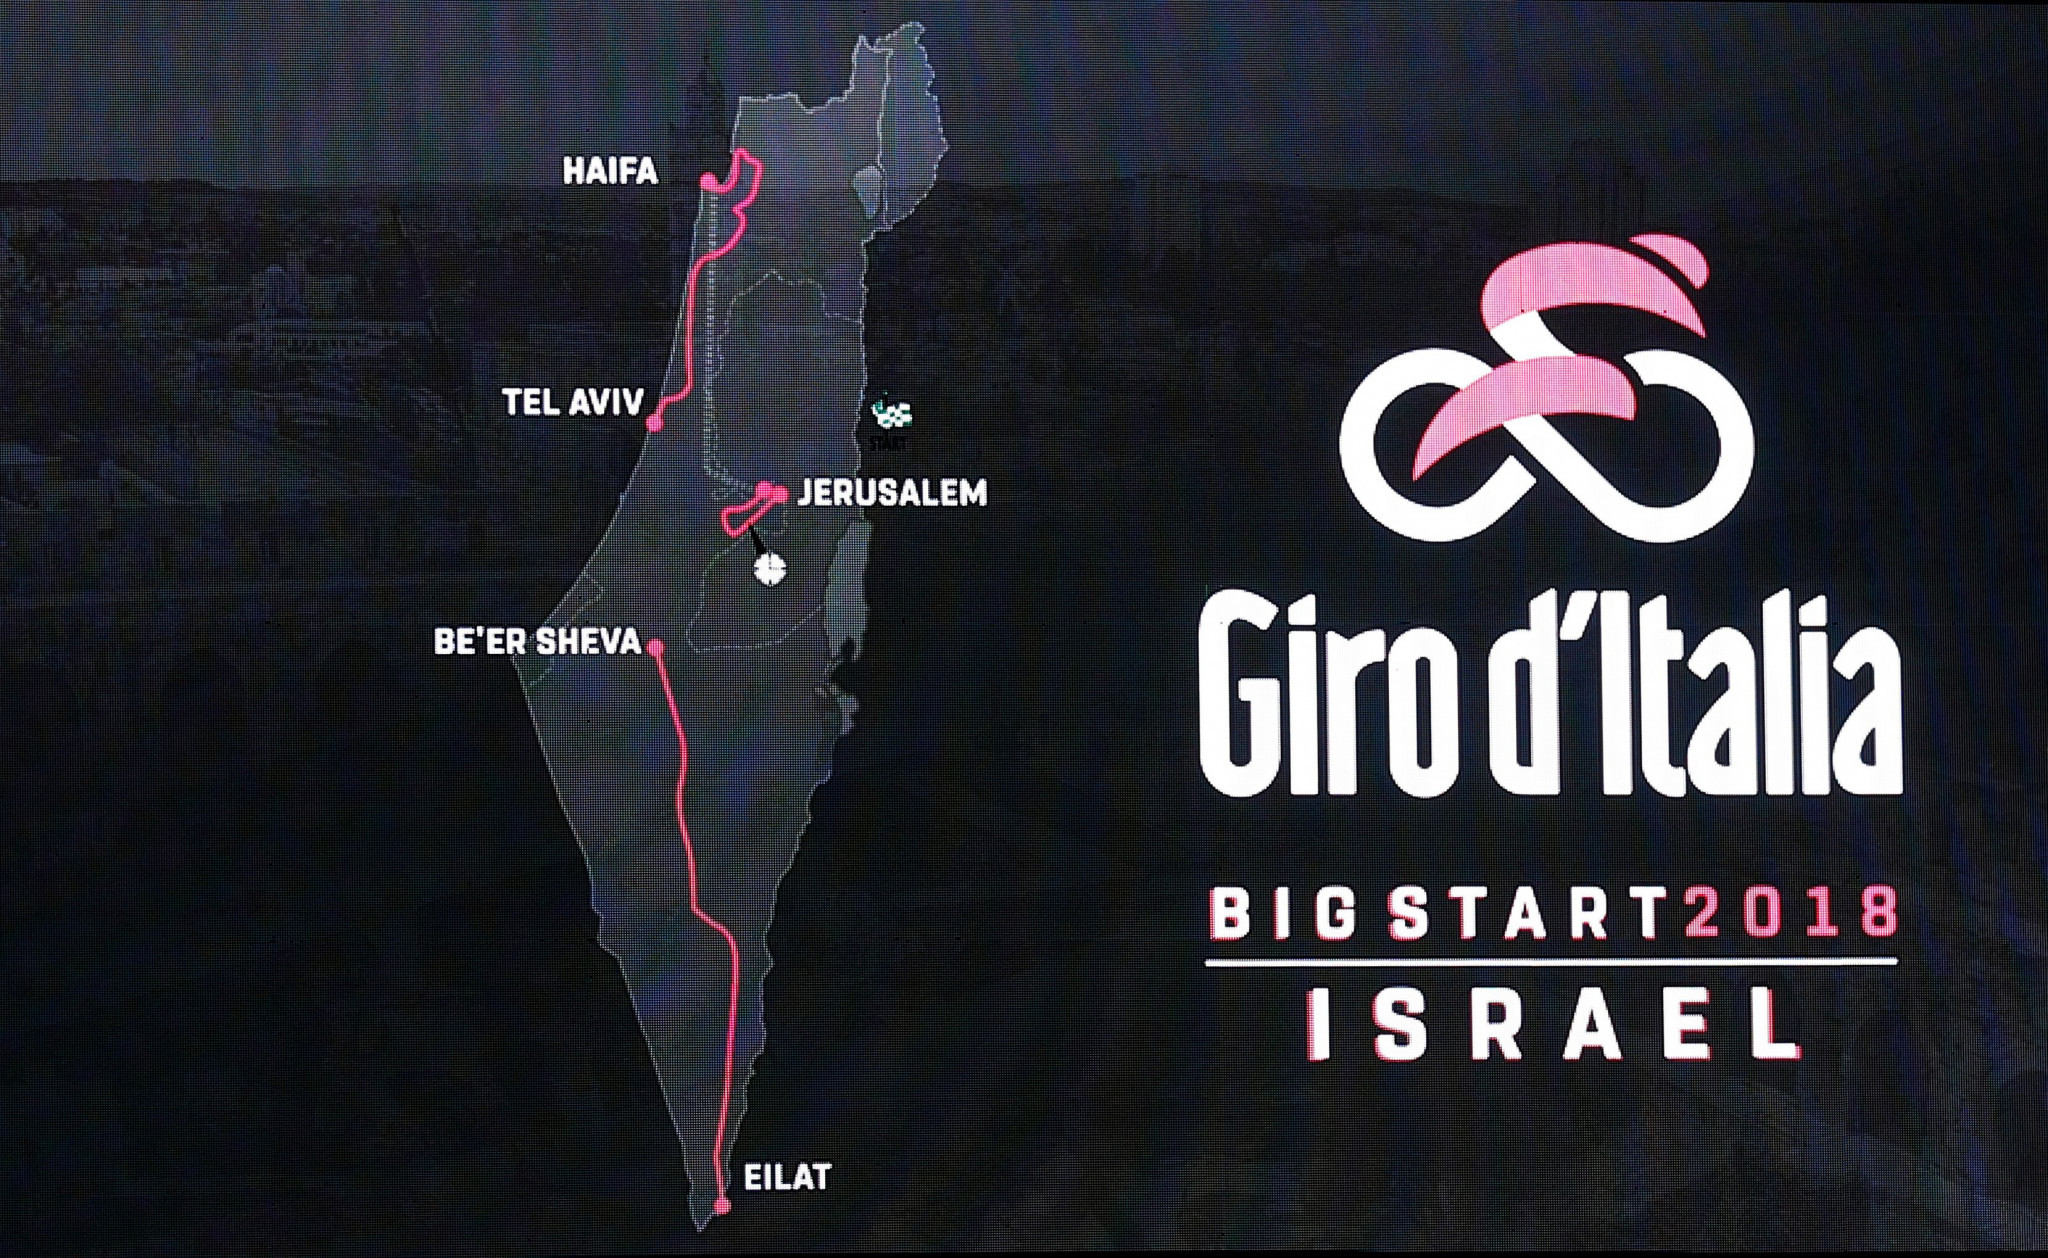 Israel will host the first three stages of the 2018 Giro d'Italia ©Getty Images